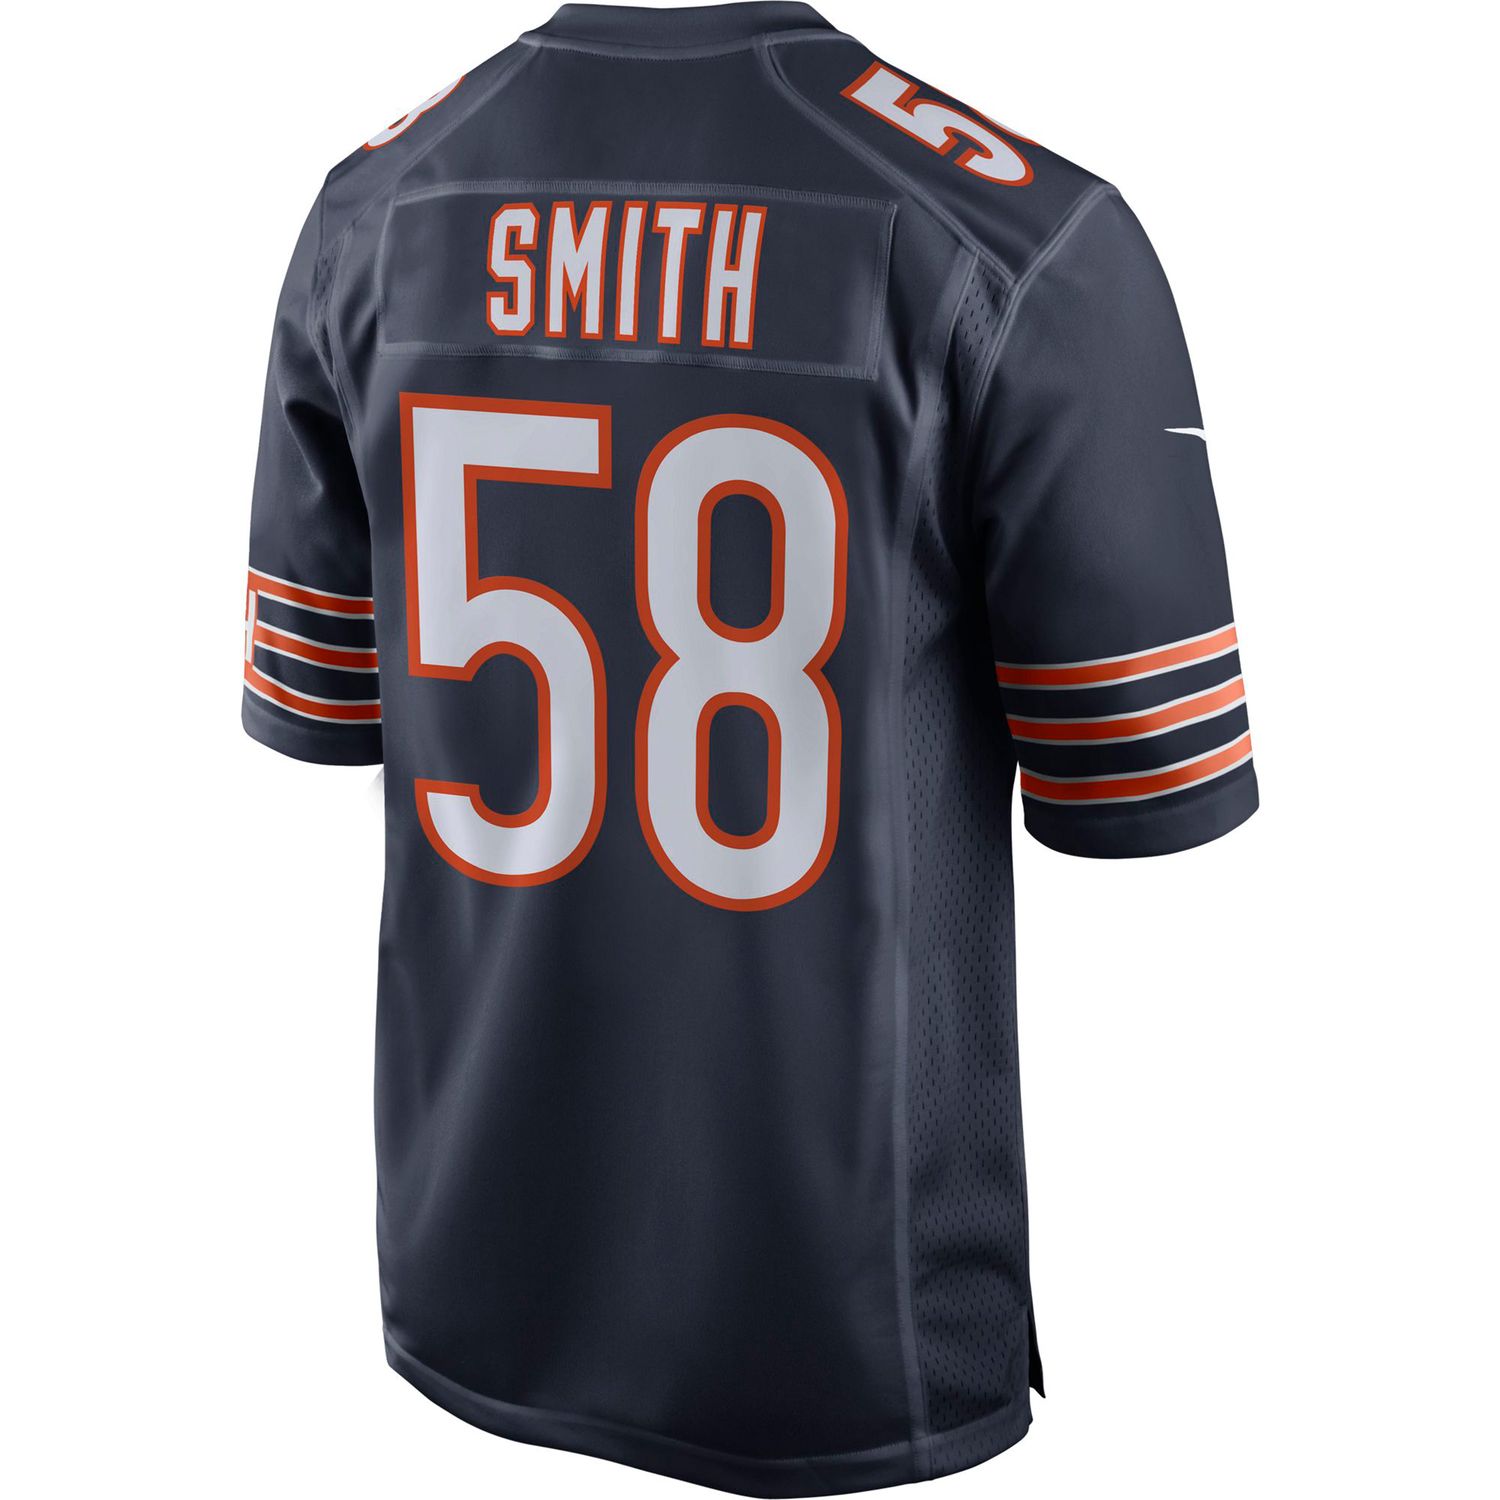 roquan smith jersey